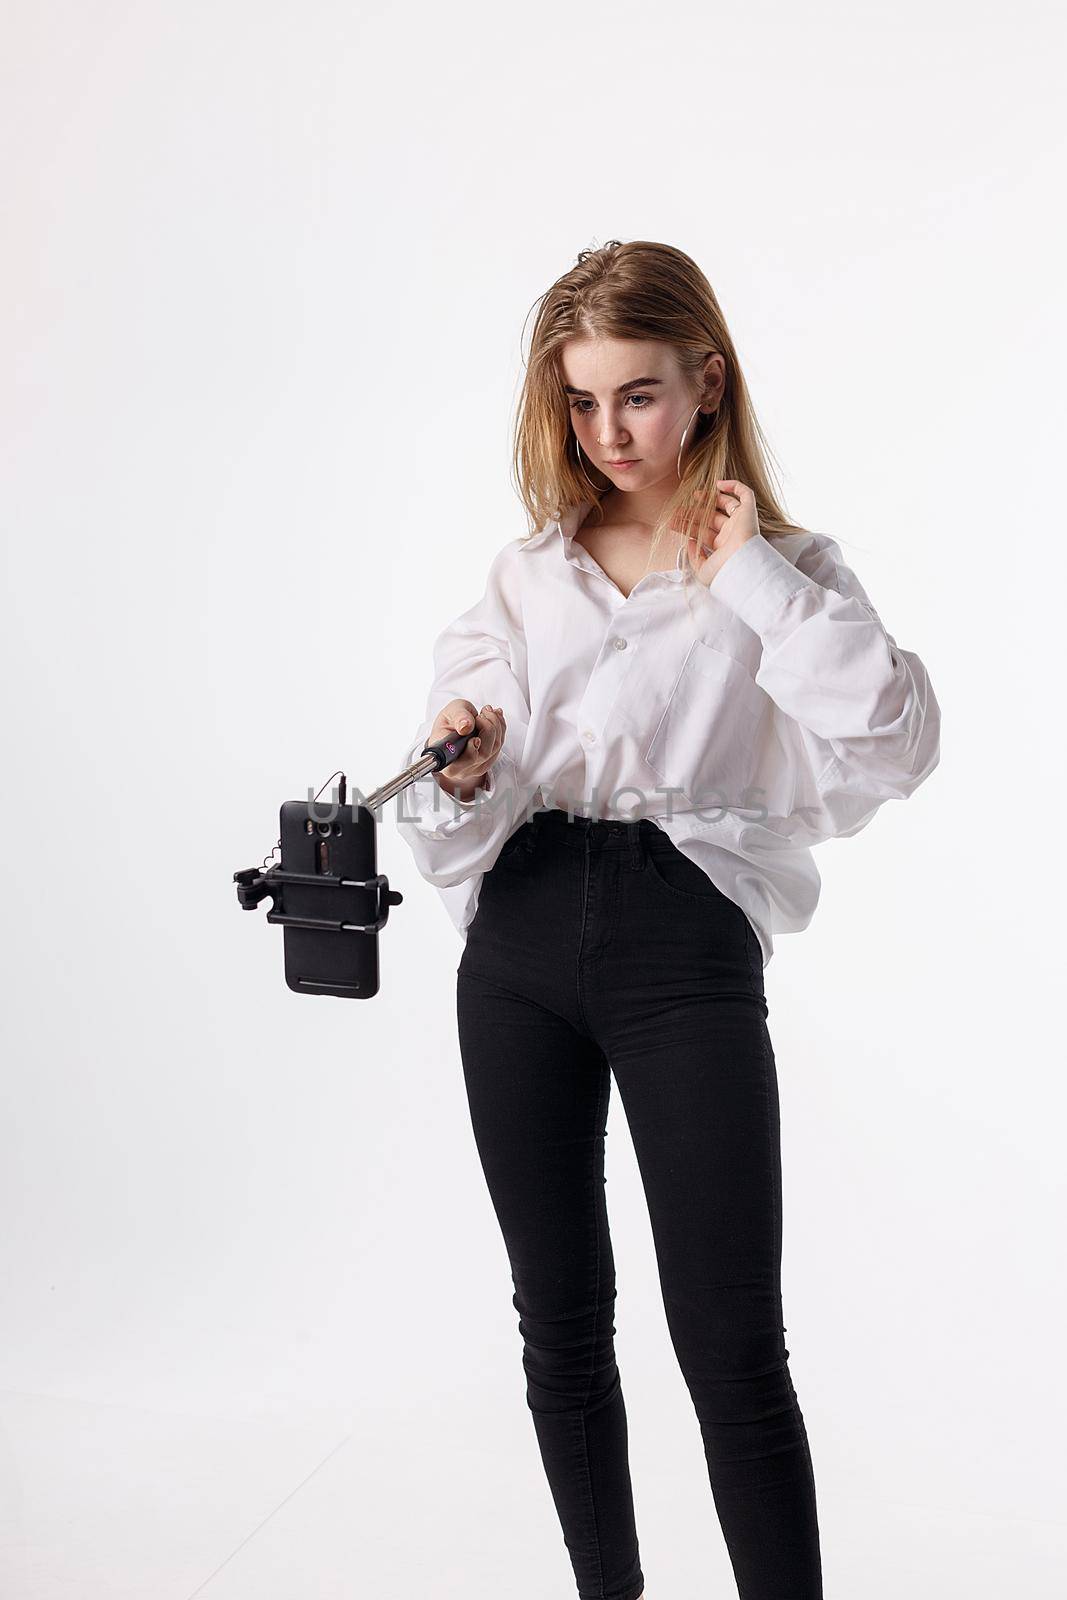 cute girl in shirt, jeans makes self portrait with smartphone attached to selfie stick. young pretty blond female with long hair poses using cell phone isolated on white background. teen communication